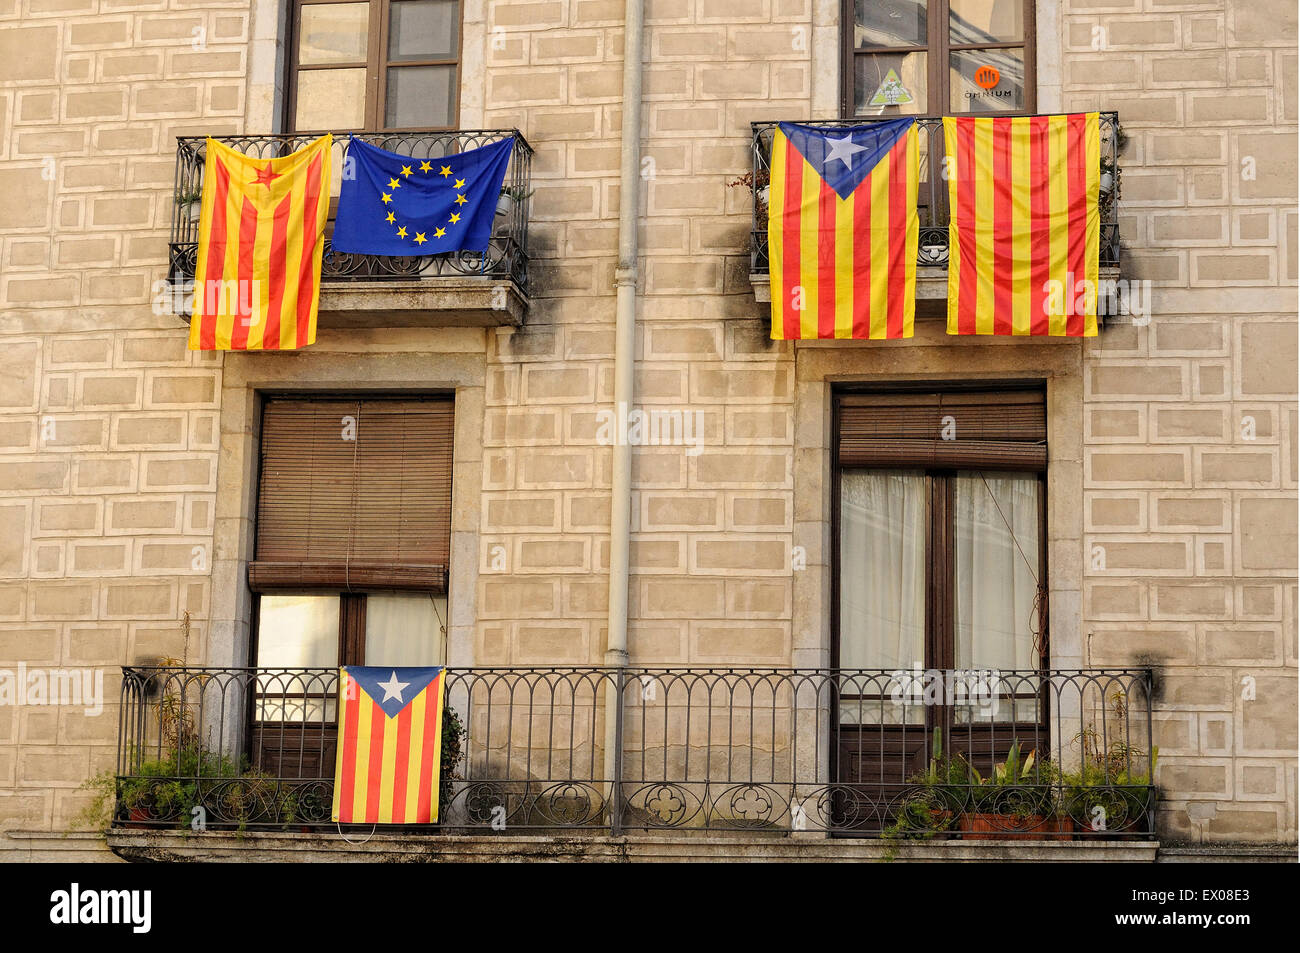 Catalonia independence flags hanging from the balconies of a facade. Girona. Catalonia. Spain. Stock Photo